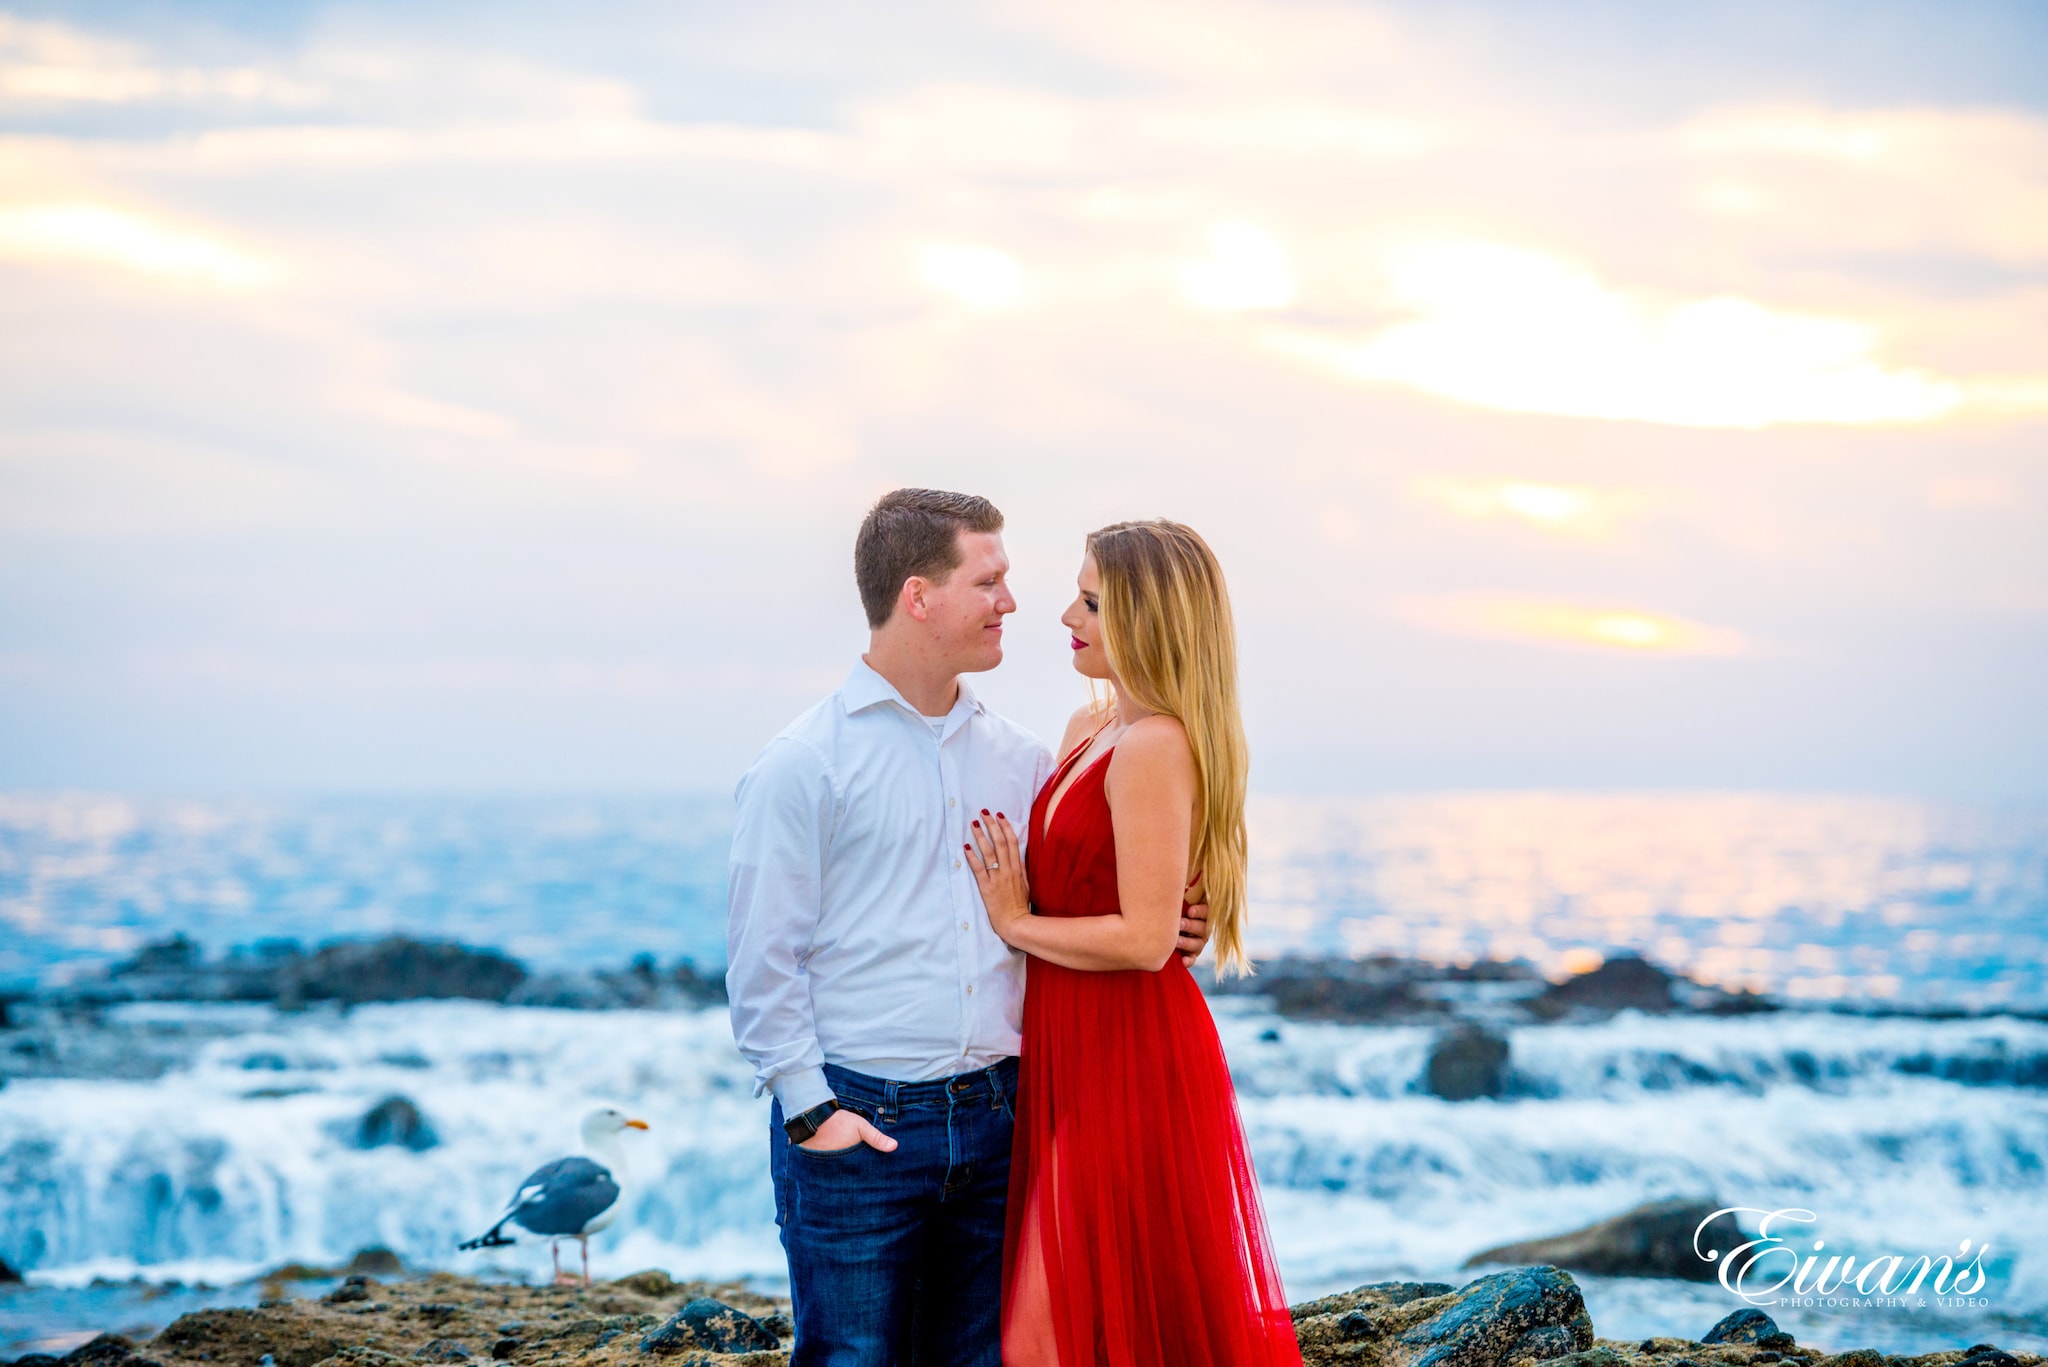 man in white dress shirt and woman in orange dress standing on rocky shore during daytime